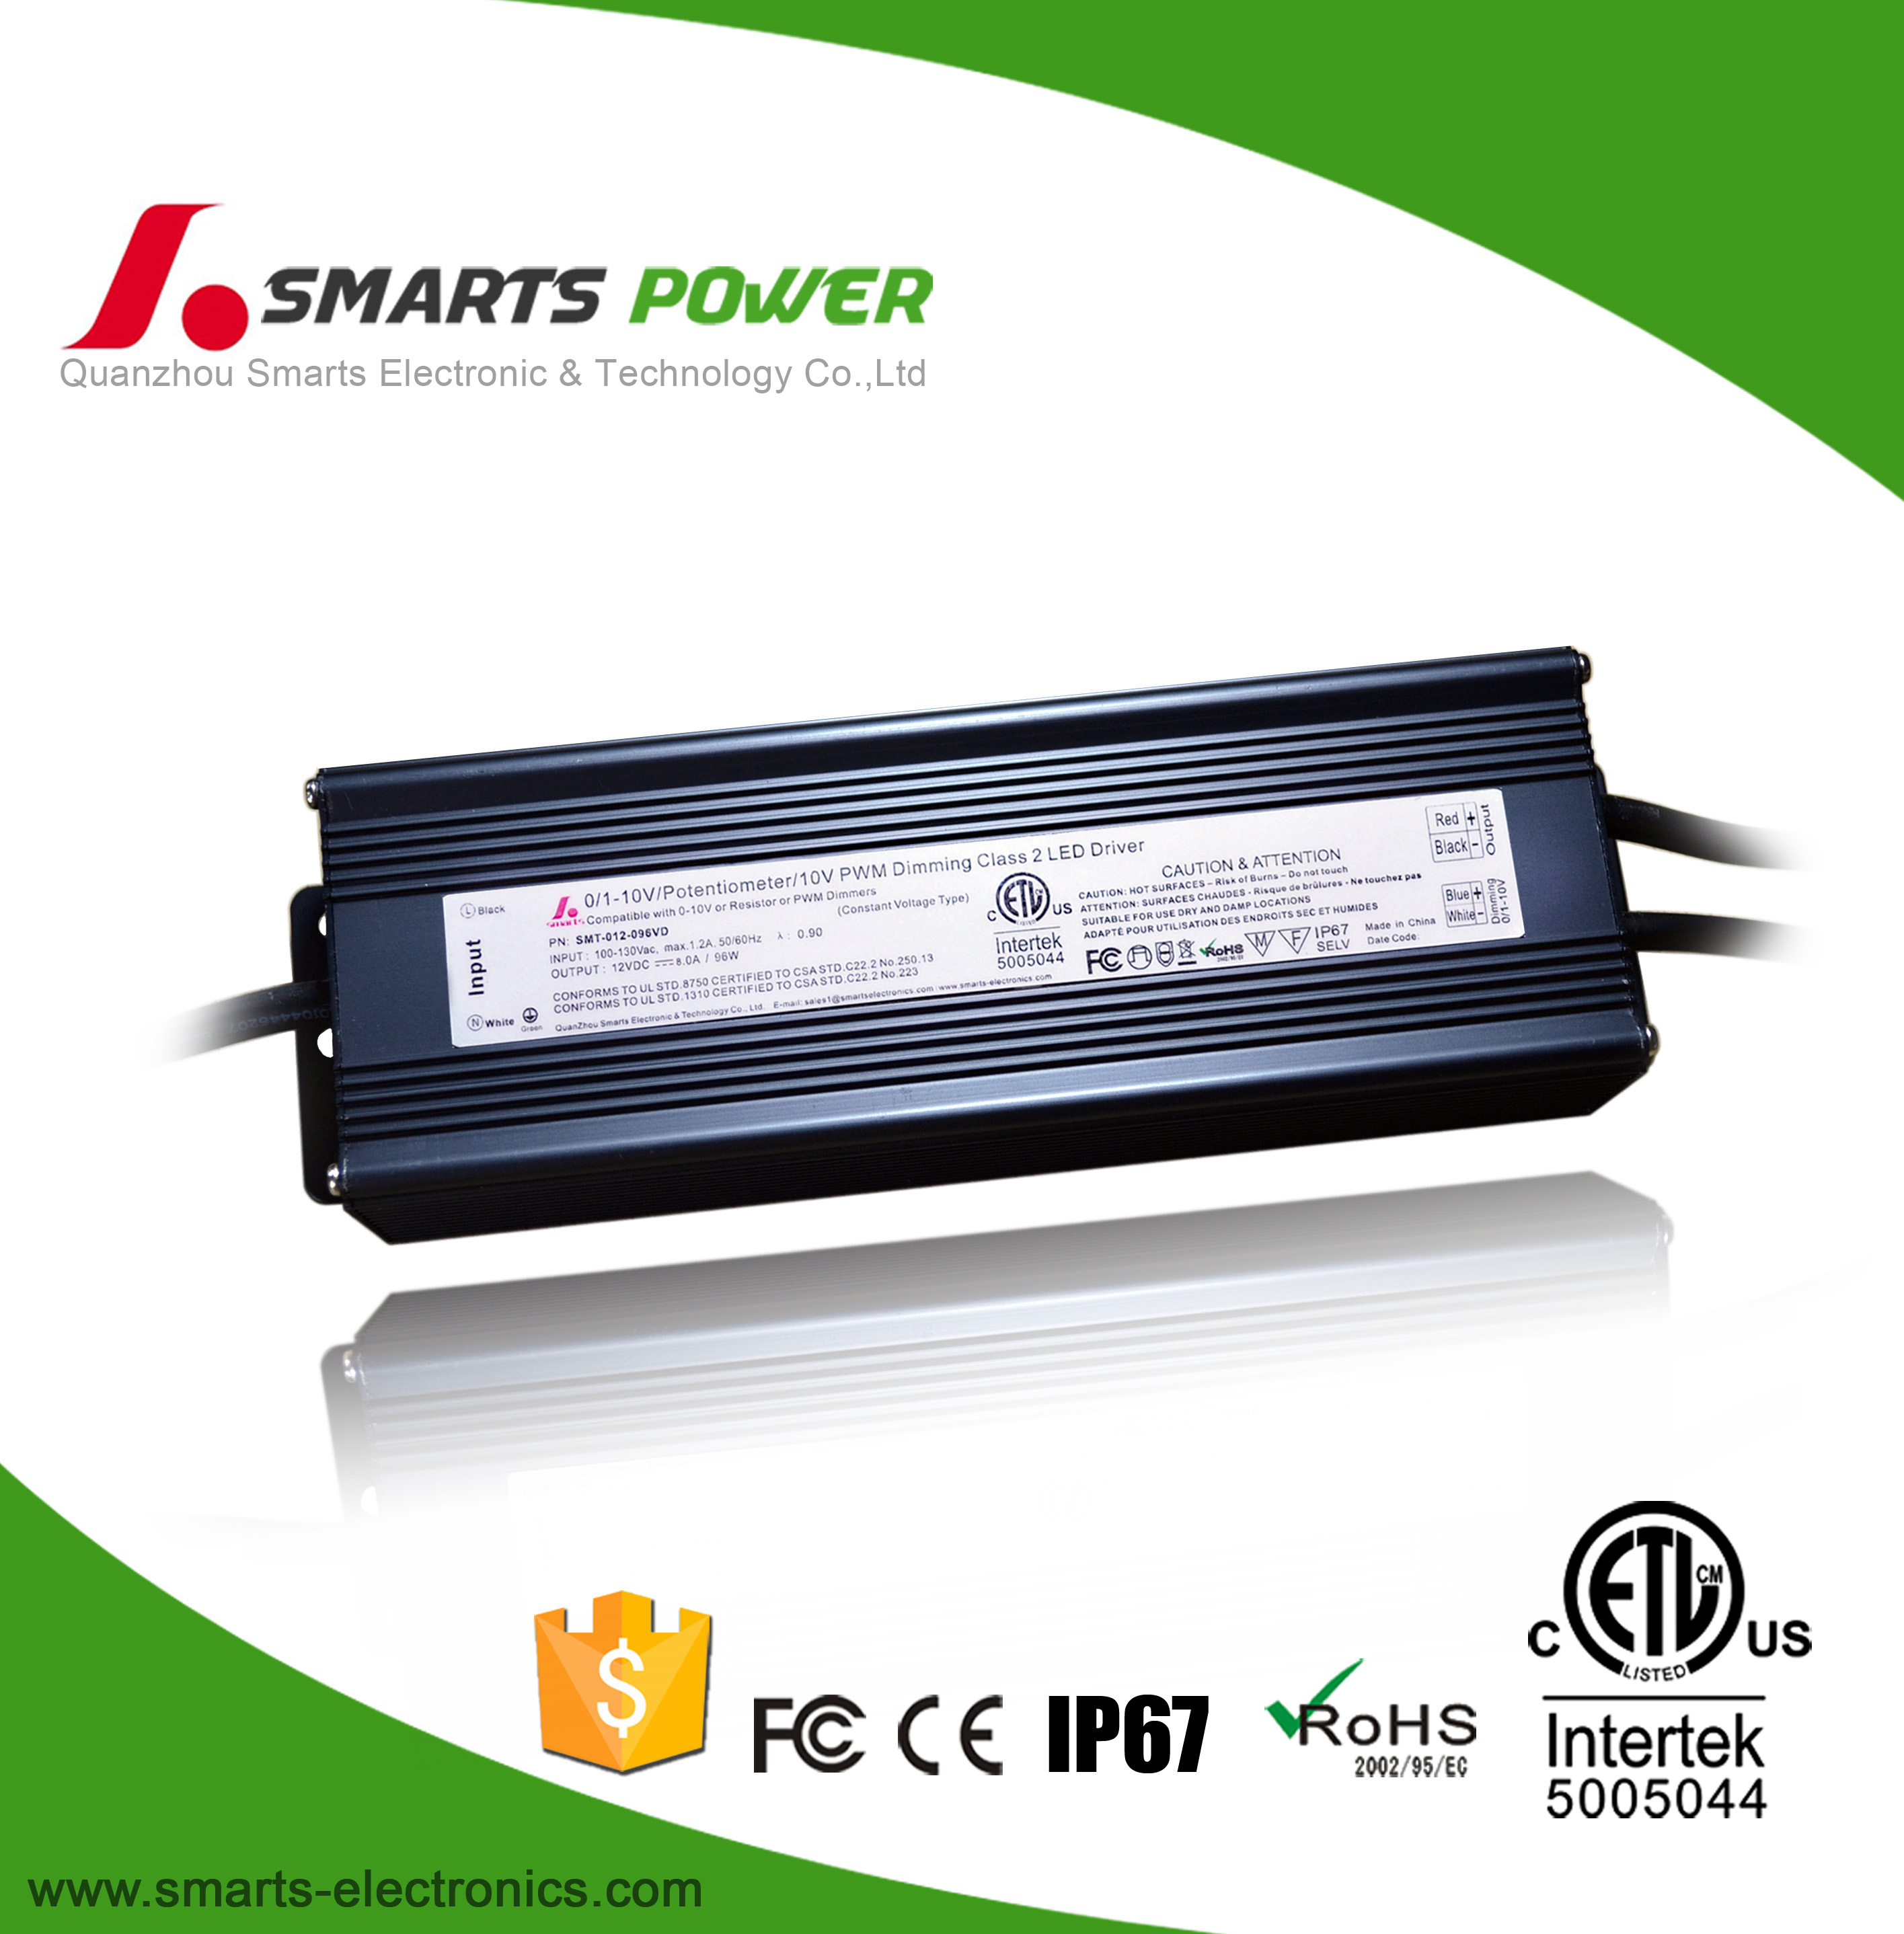 What is the differences of Smarts'0-10v led driver from other vendors